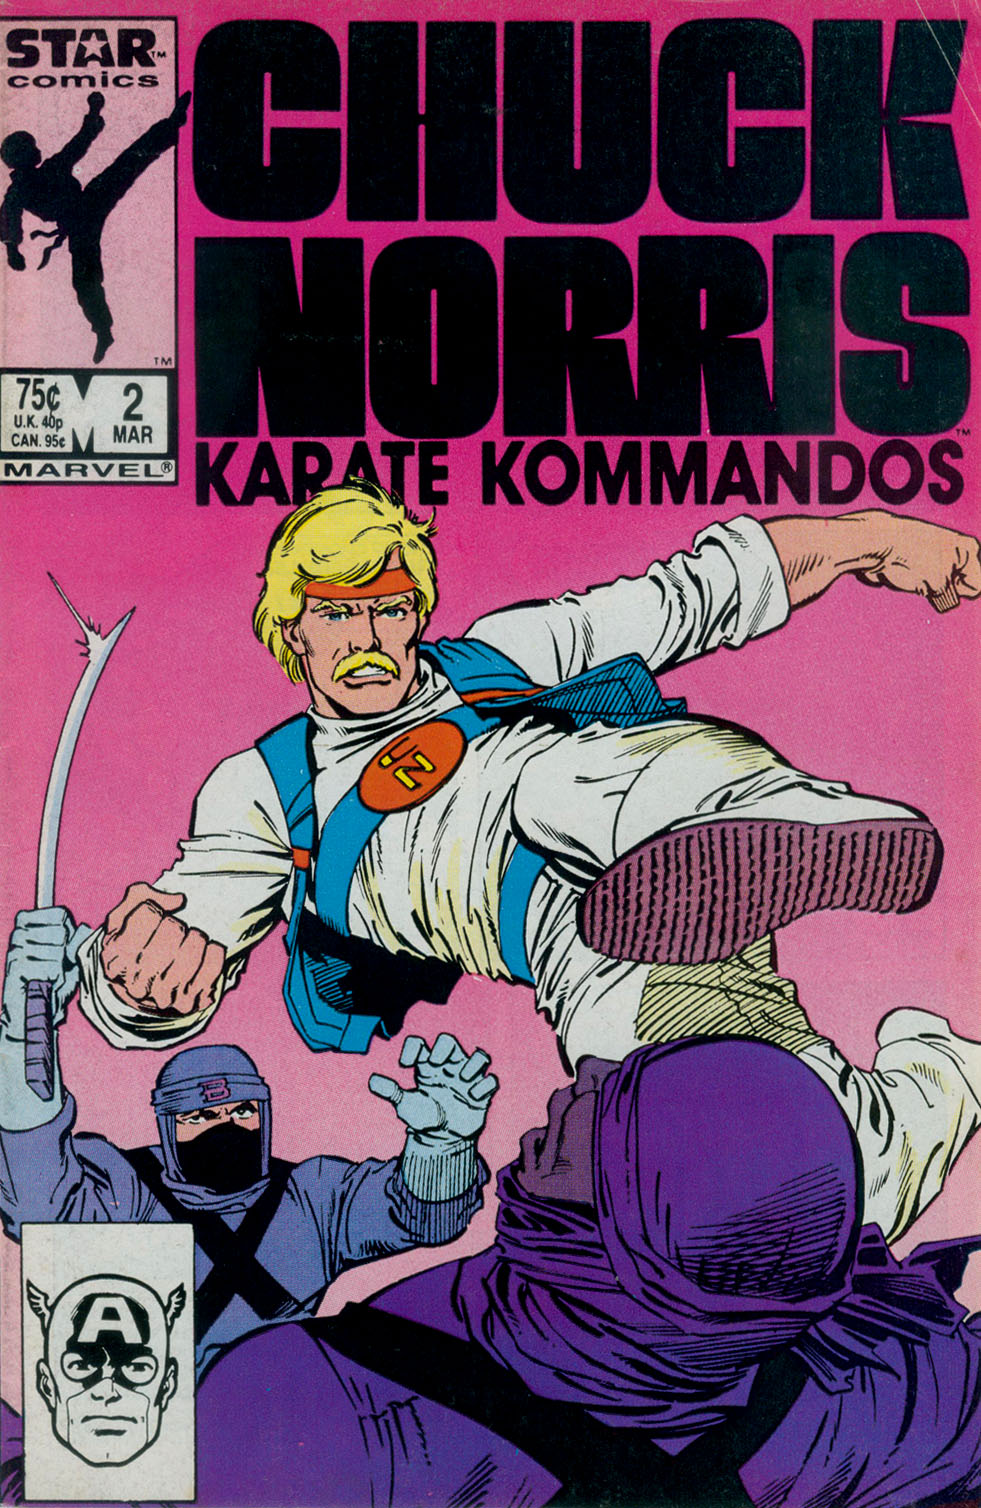 Read online Chuck Norris and the Karate Kommandos comic -  Issue #2 - 1